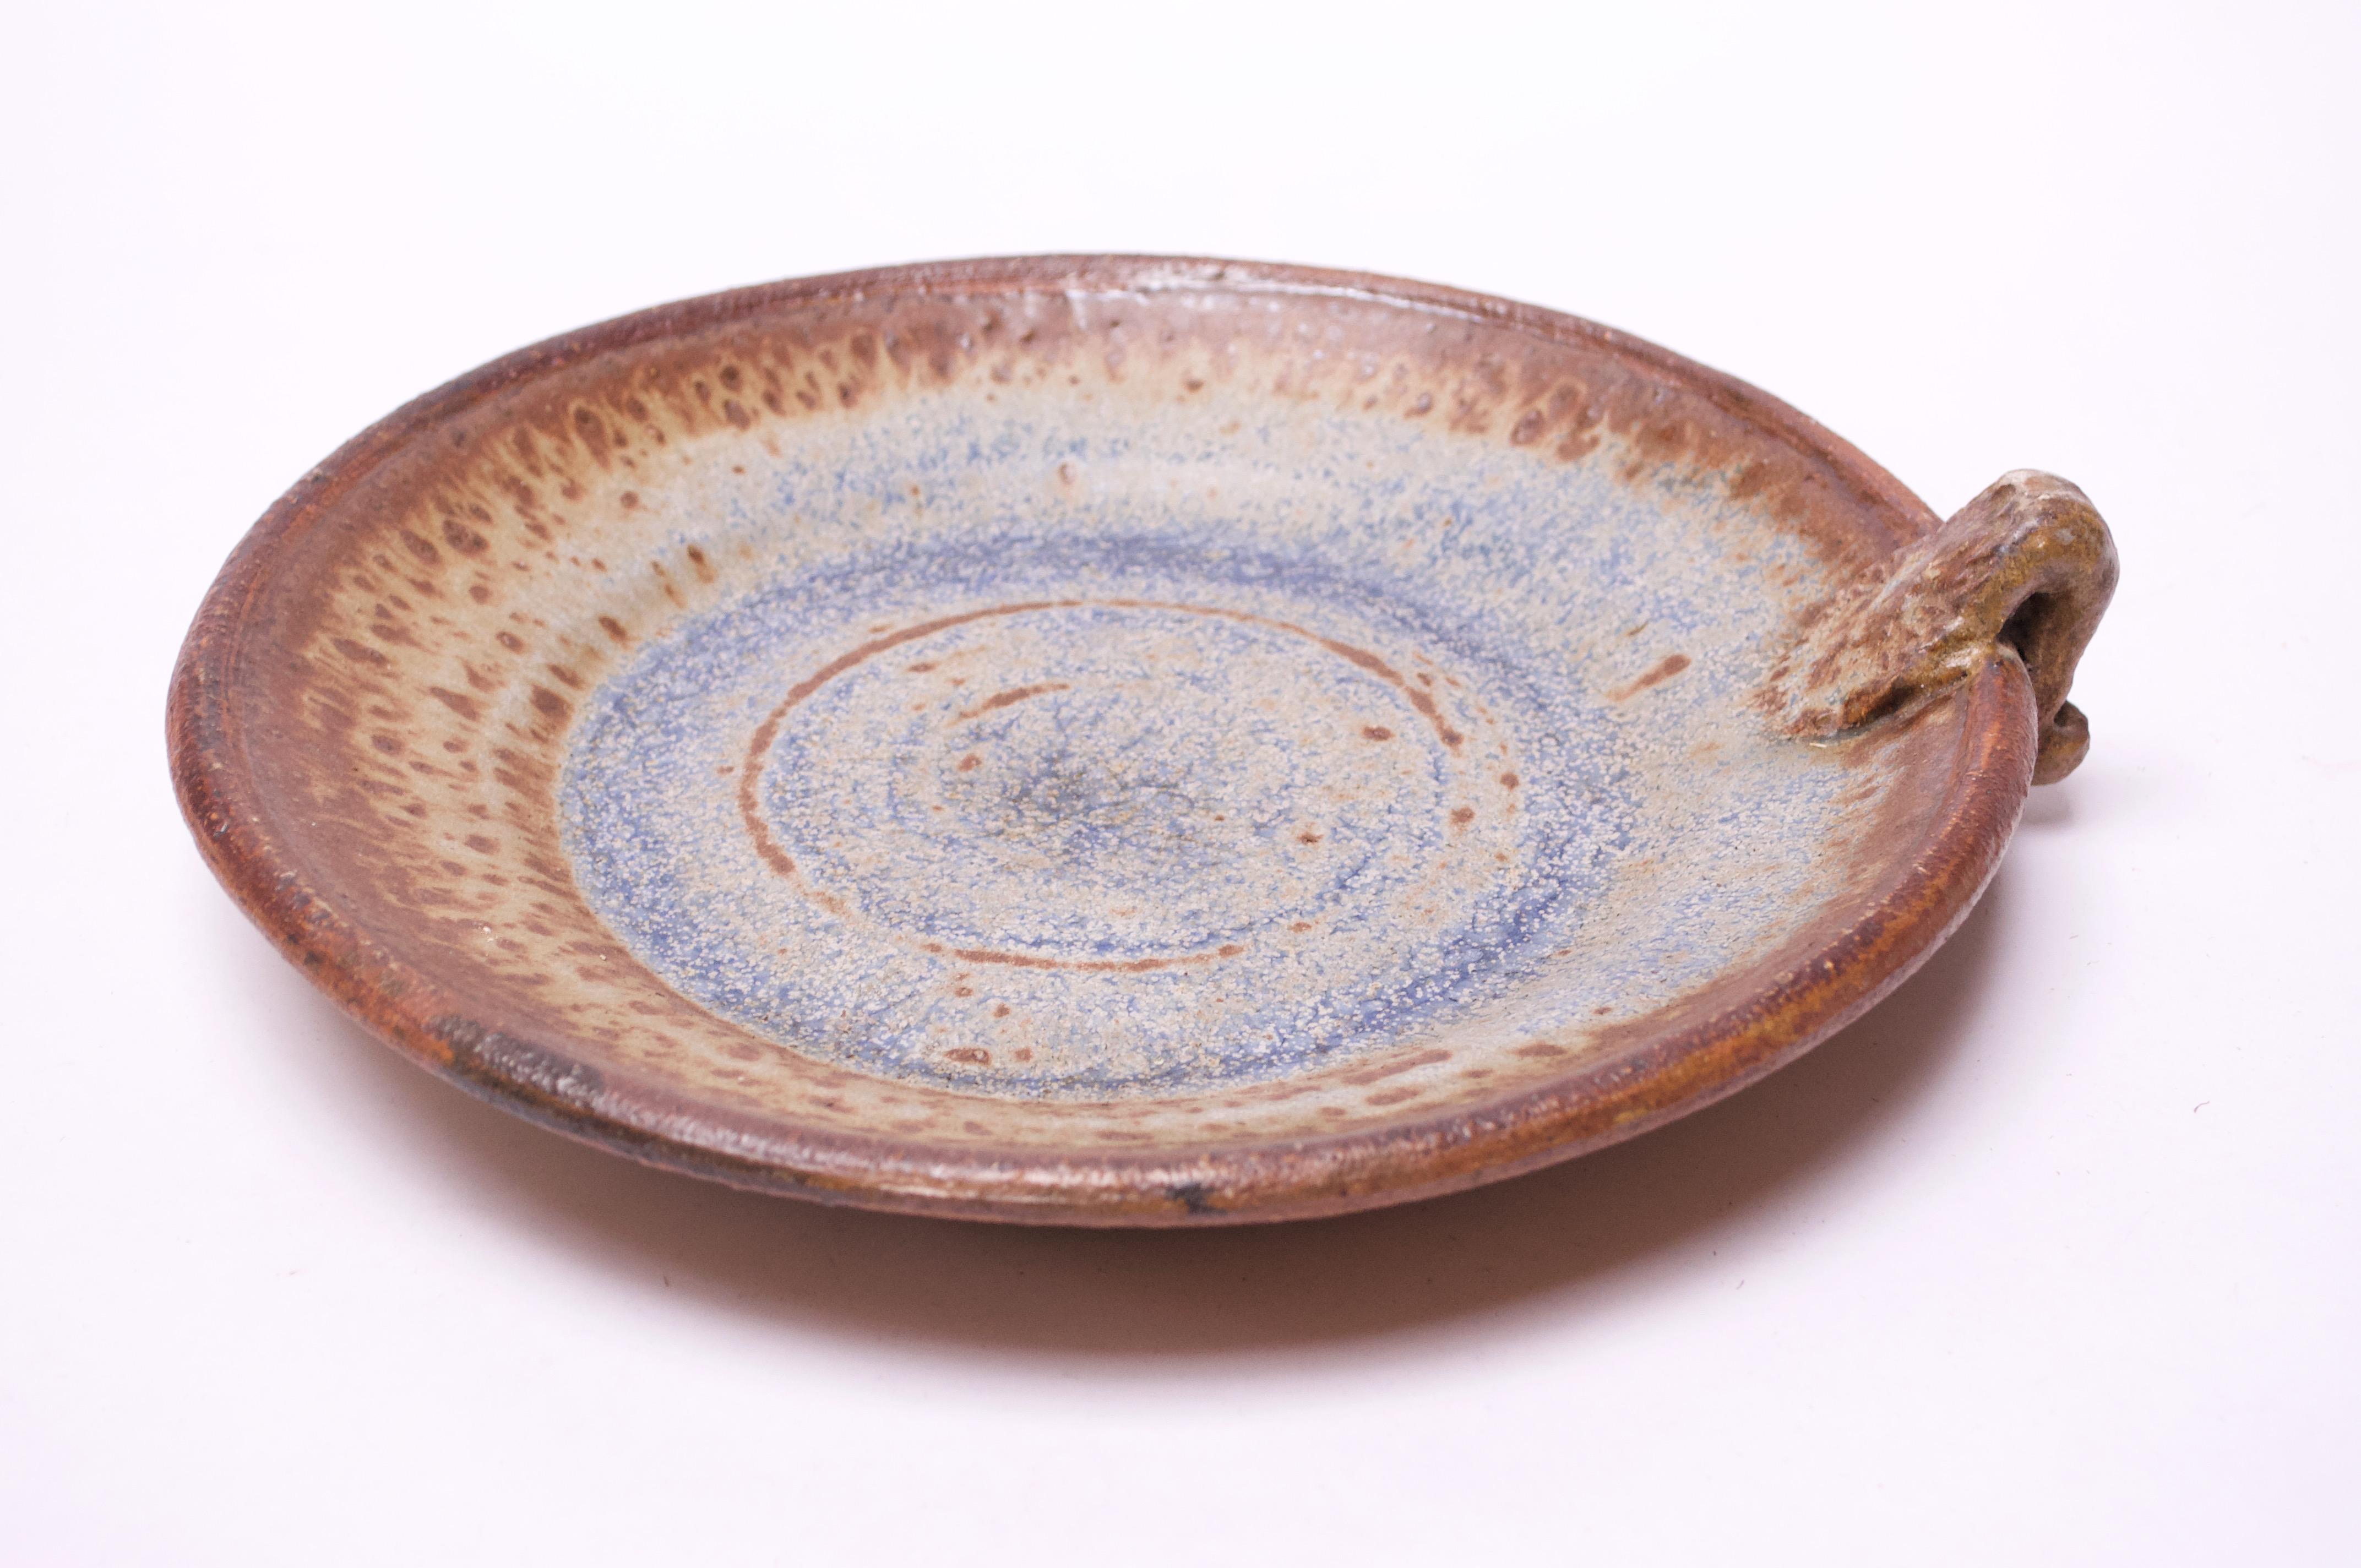 Attractive stoneware charger / decorative plate in blue and brown with concentric circles pattern (inner circle is only a partial outline by design). Additionally, the mottled edge and decorative handle add interesting textural elements to the